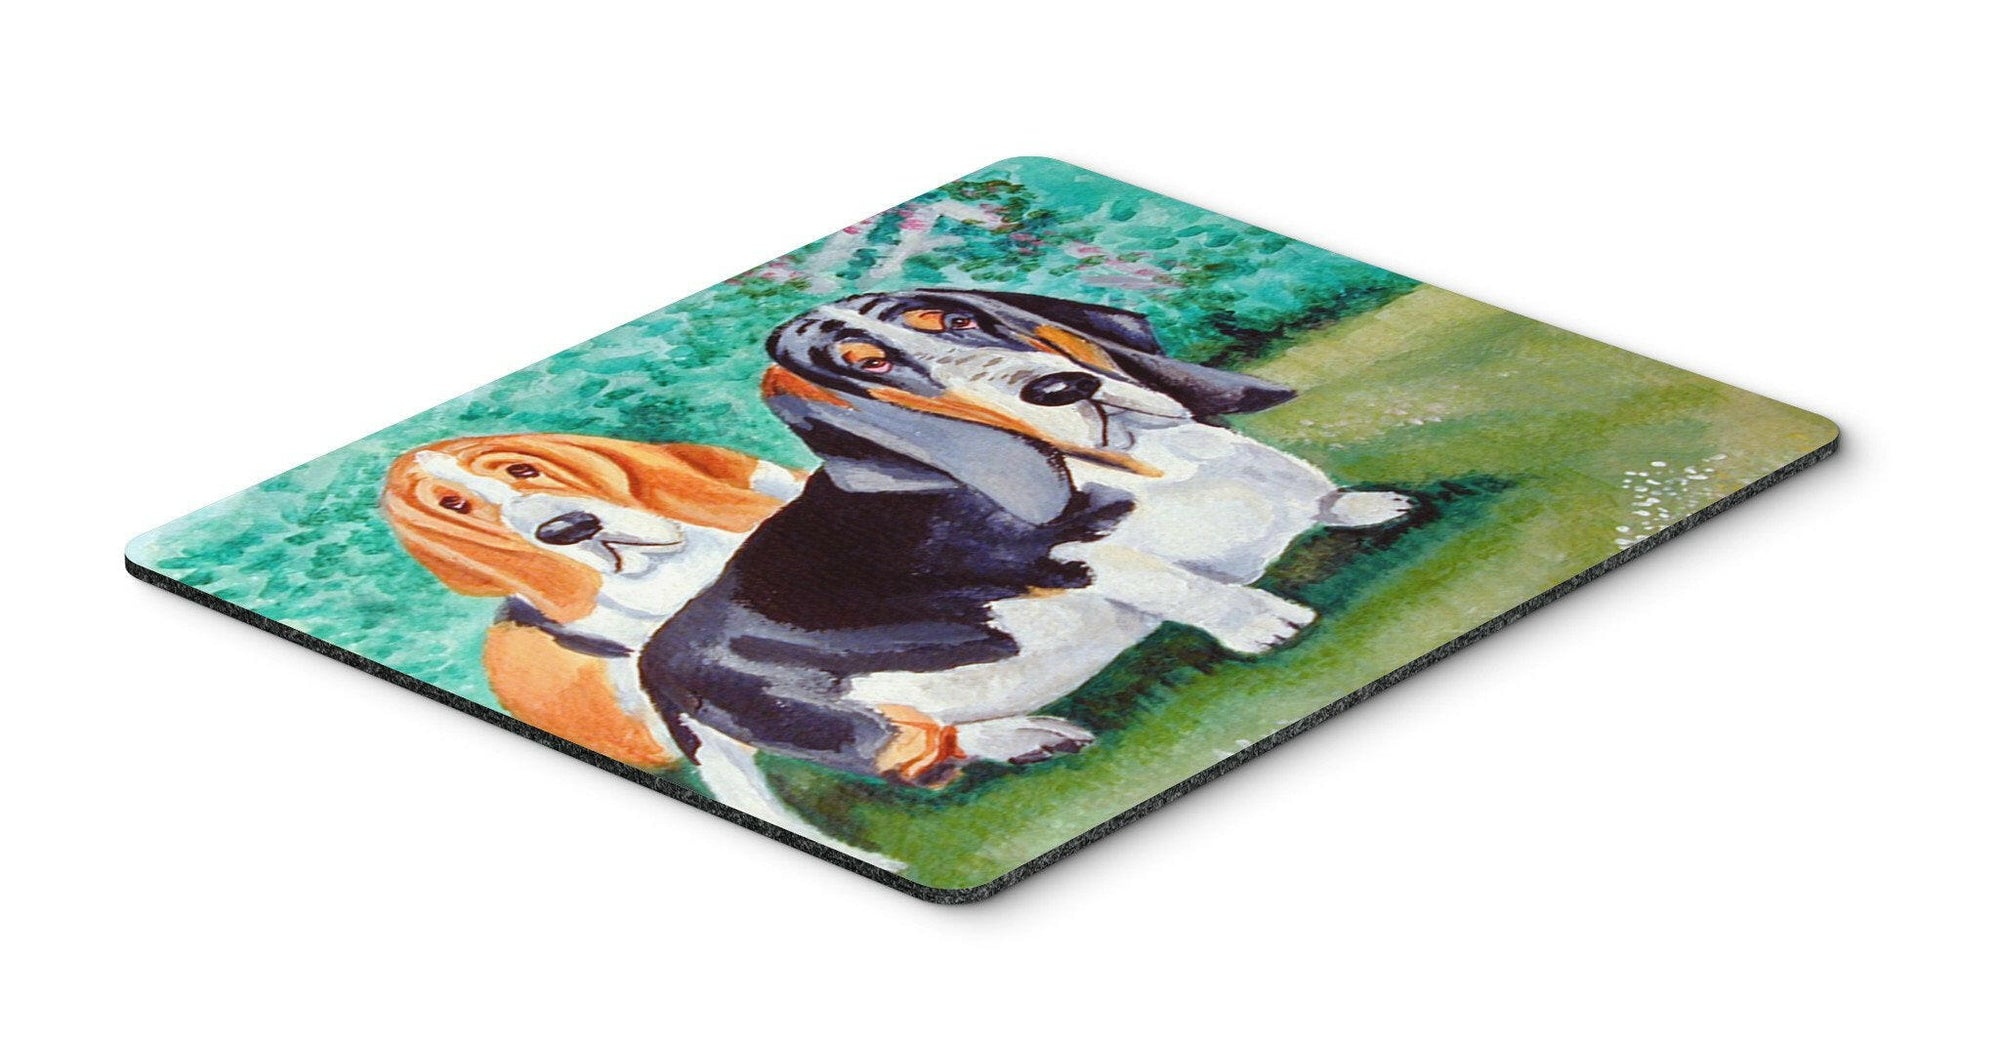 Basset Hound Double Trouble Mouse pad, hot pad, or trivet by Caroline's Treasures